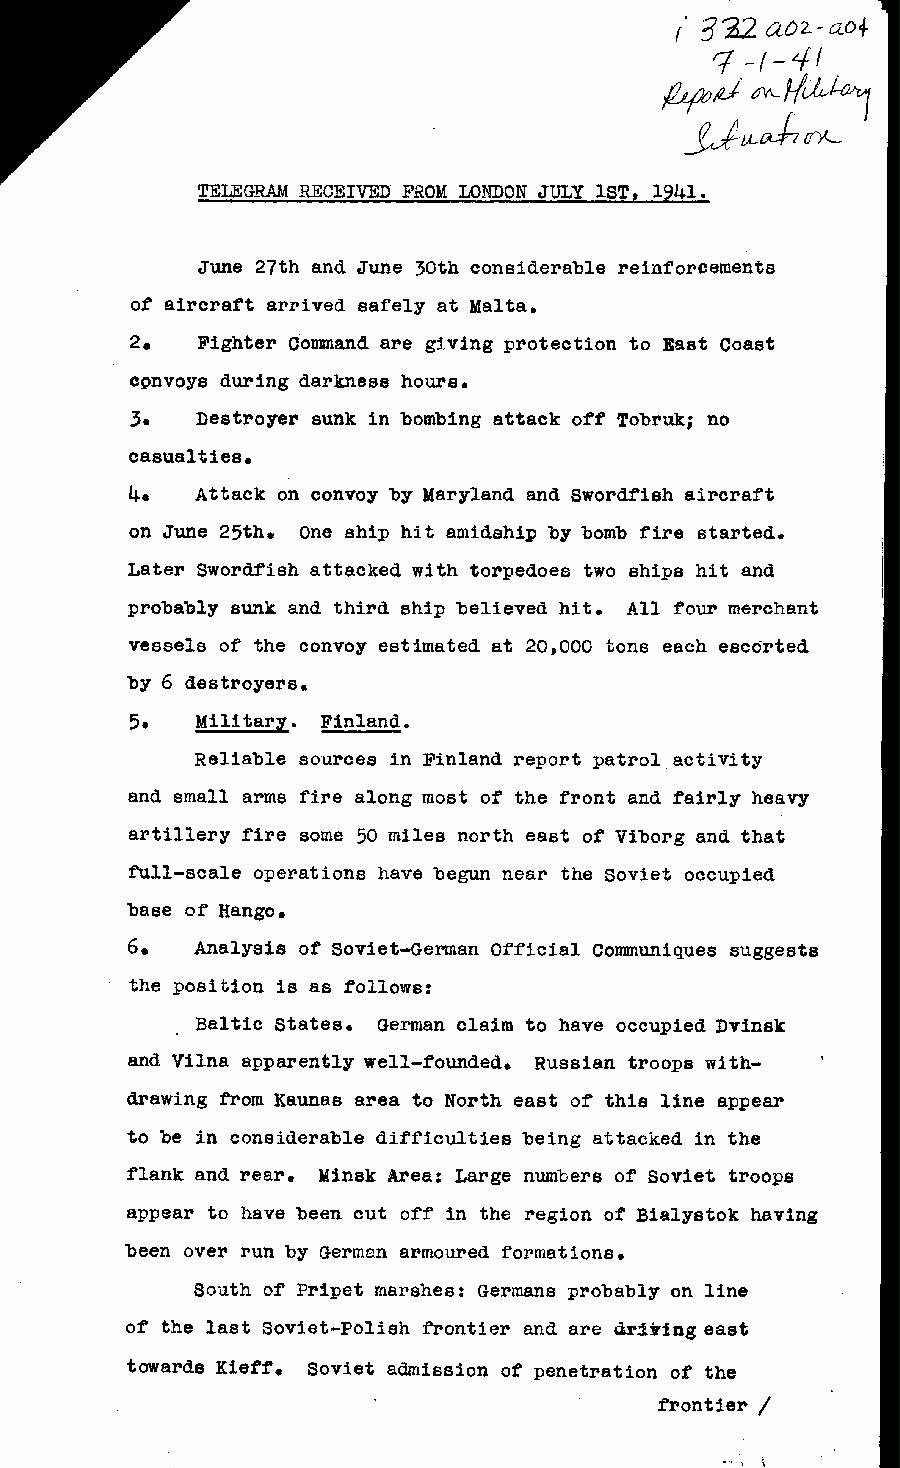 [a322a02.jpg] - Report on Military Situation 7/1/41